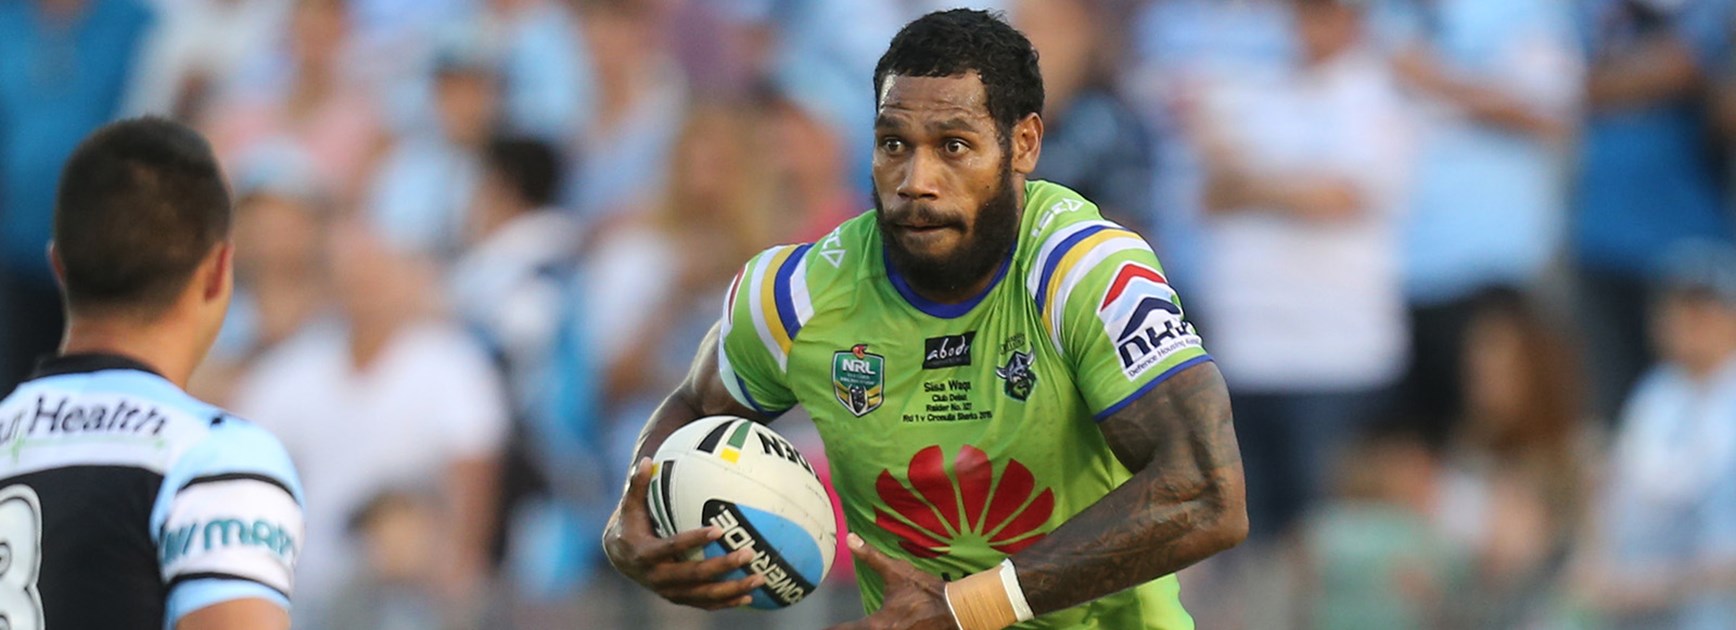 Sisa Waqa was happy with his first performance for the Canberra Raiders in their clash with the Sharks in Round 1.